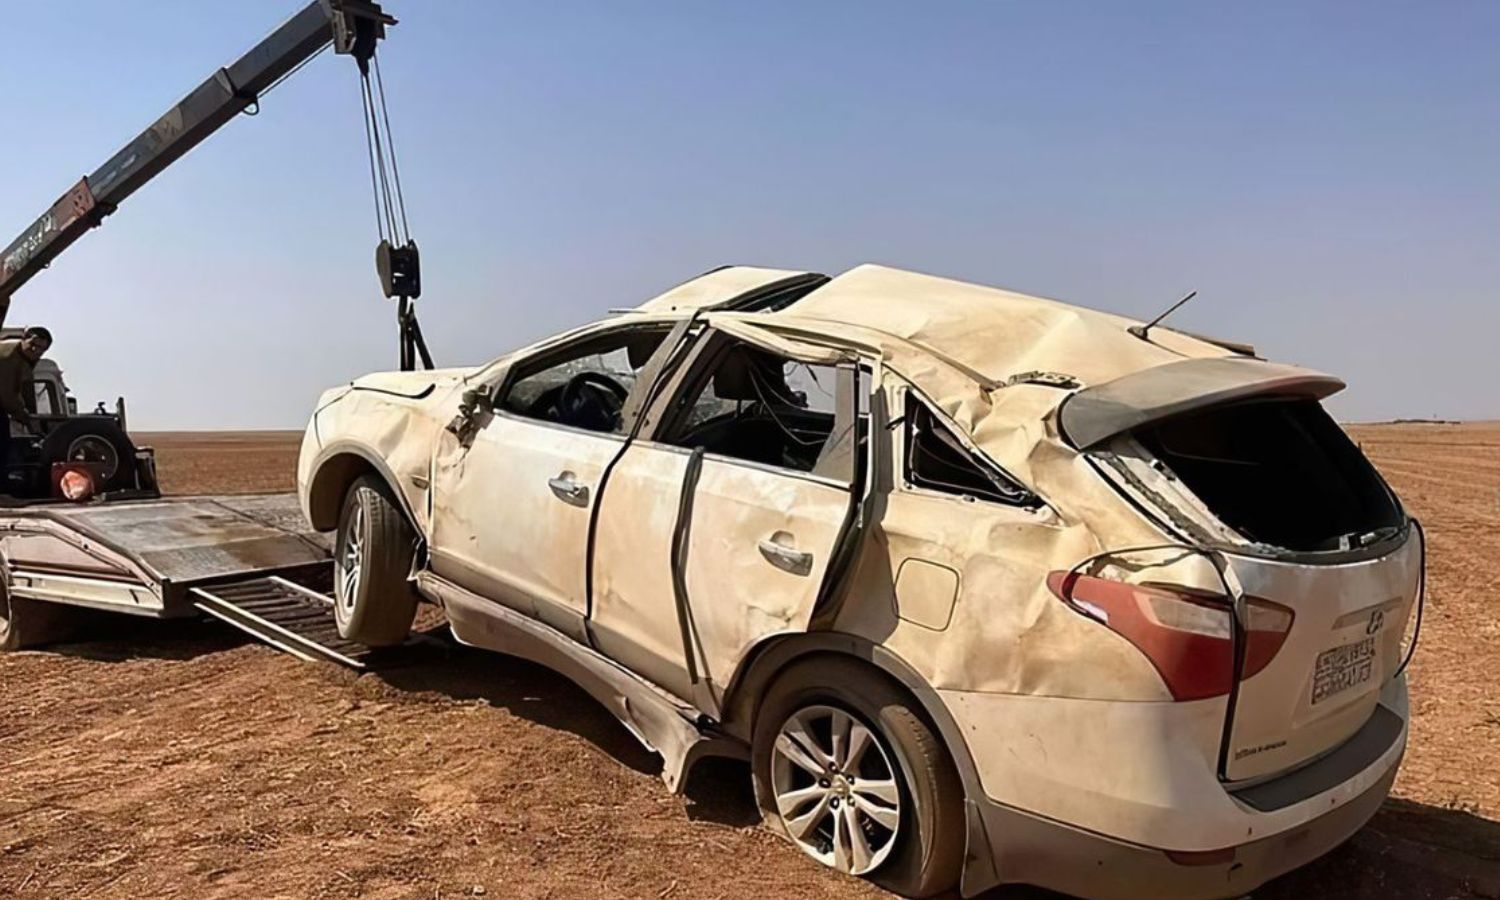 A car was crashed in a traffic accident in Qamishli - September 2022 (North Press Agency)